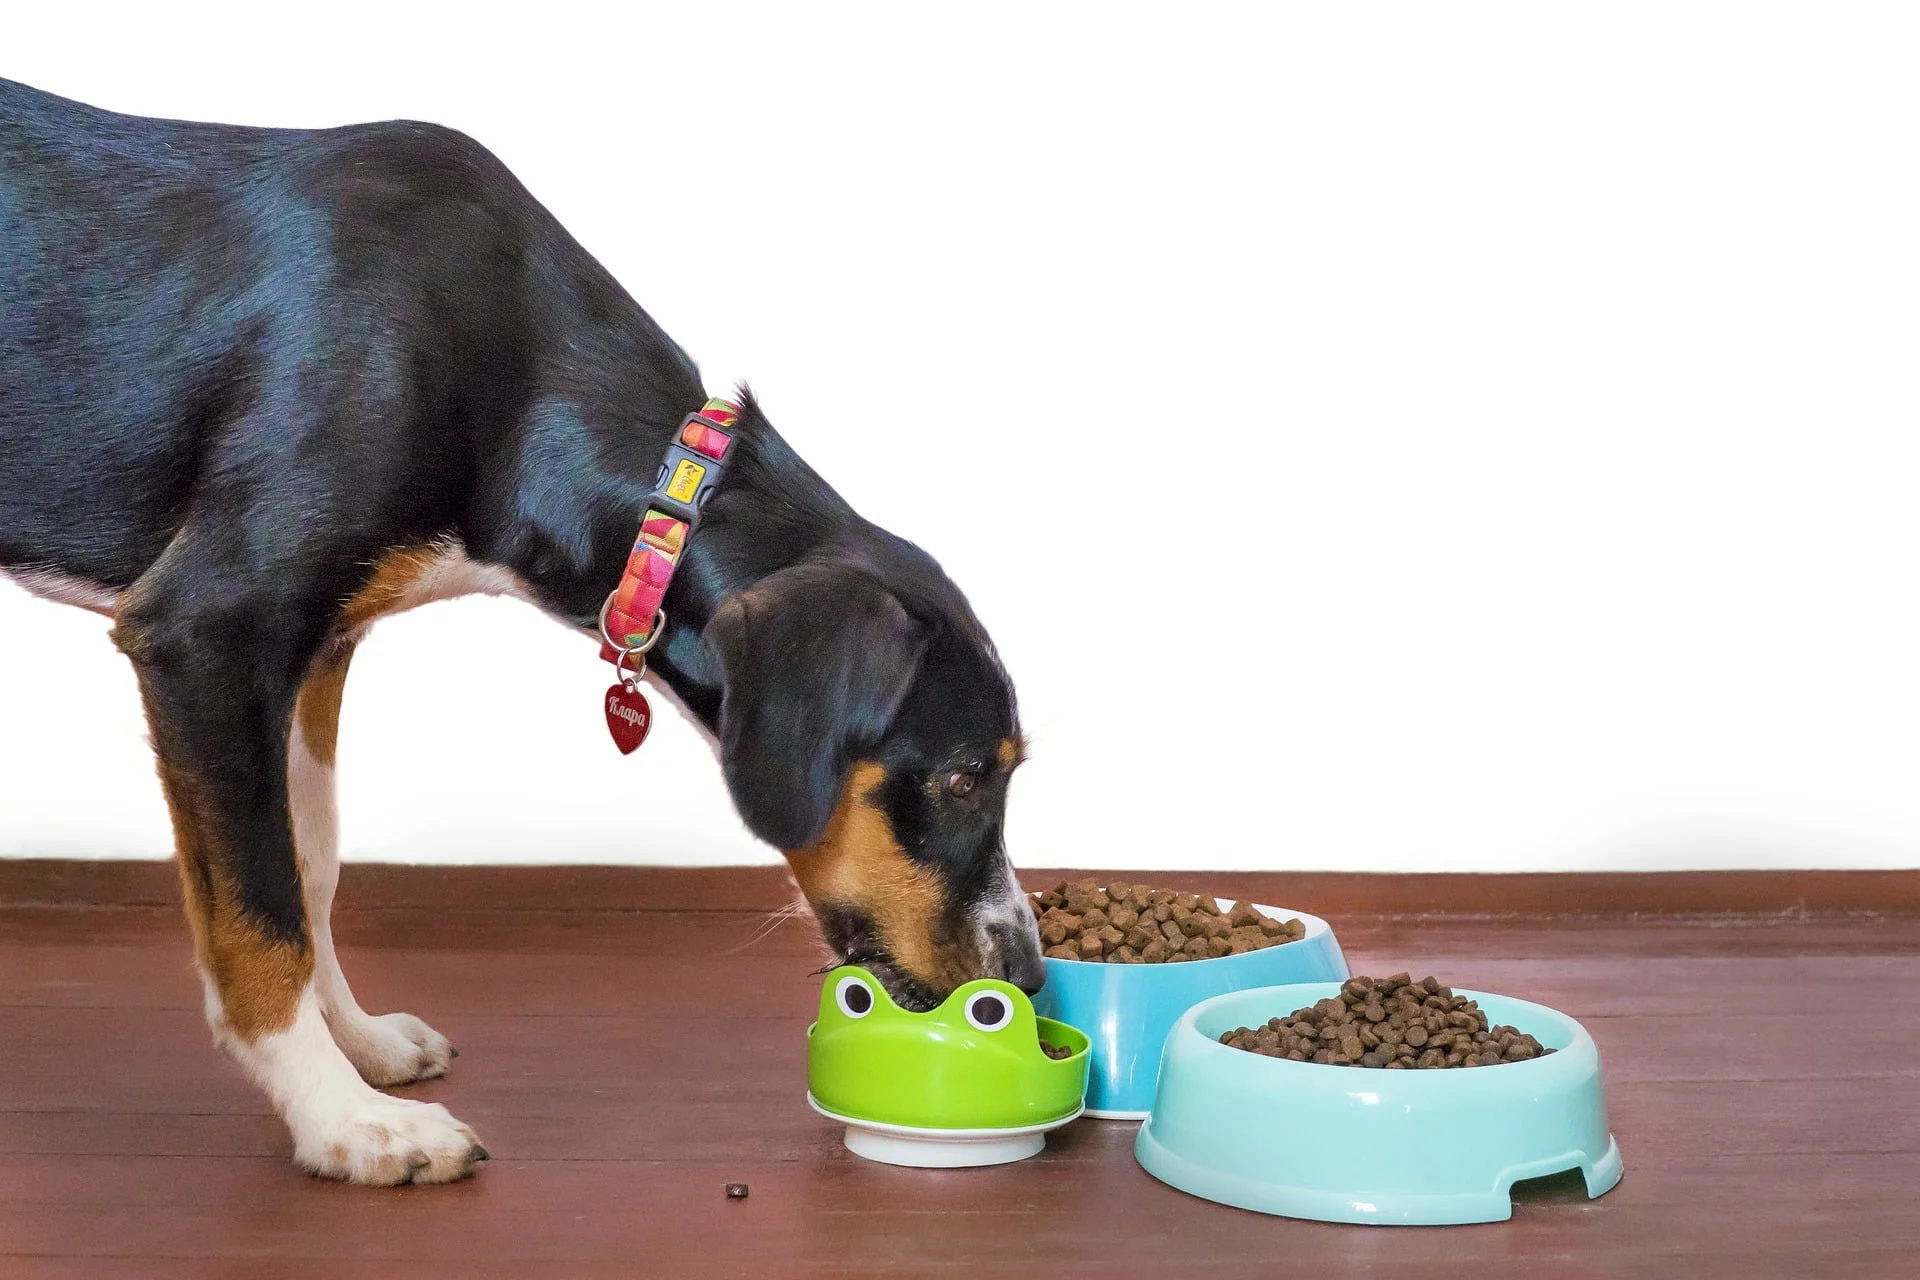 A dog eating from a small bowl